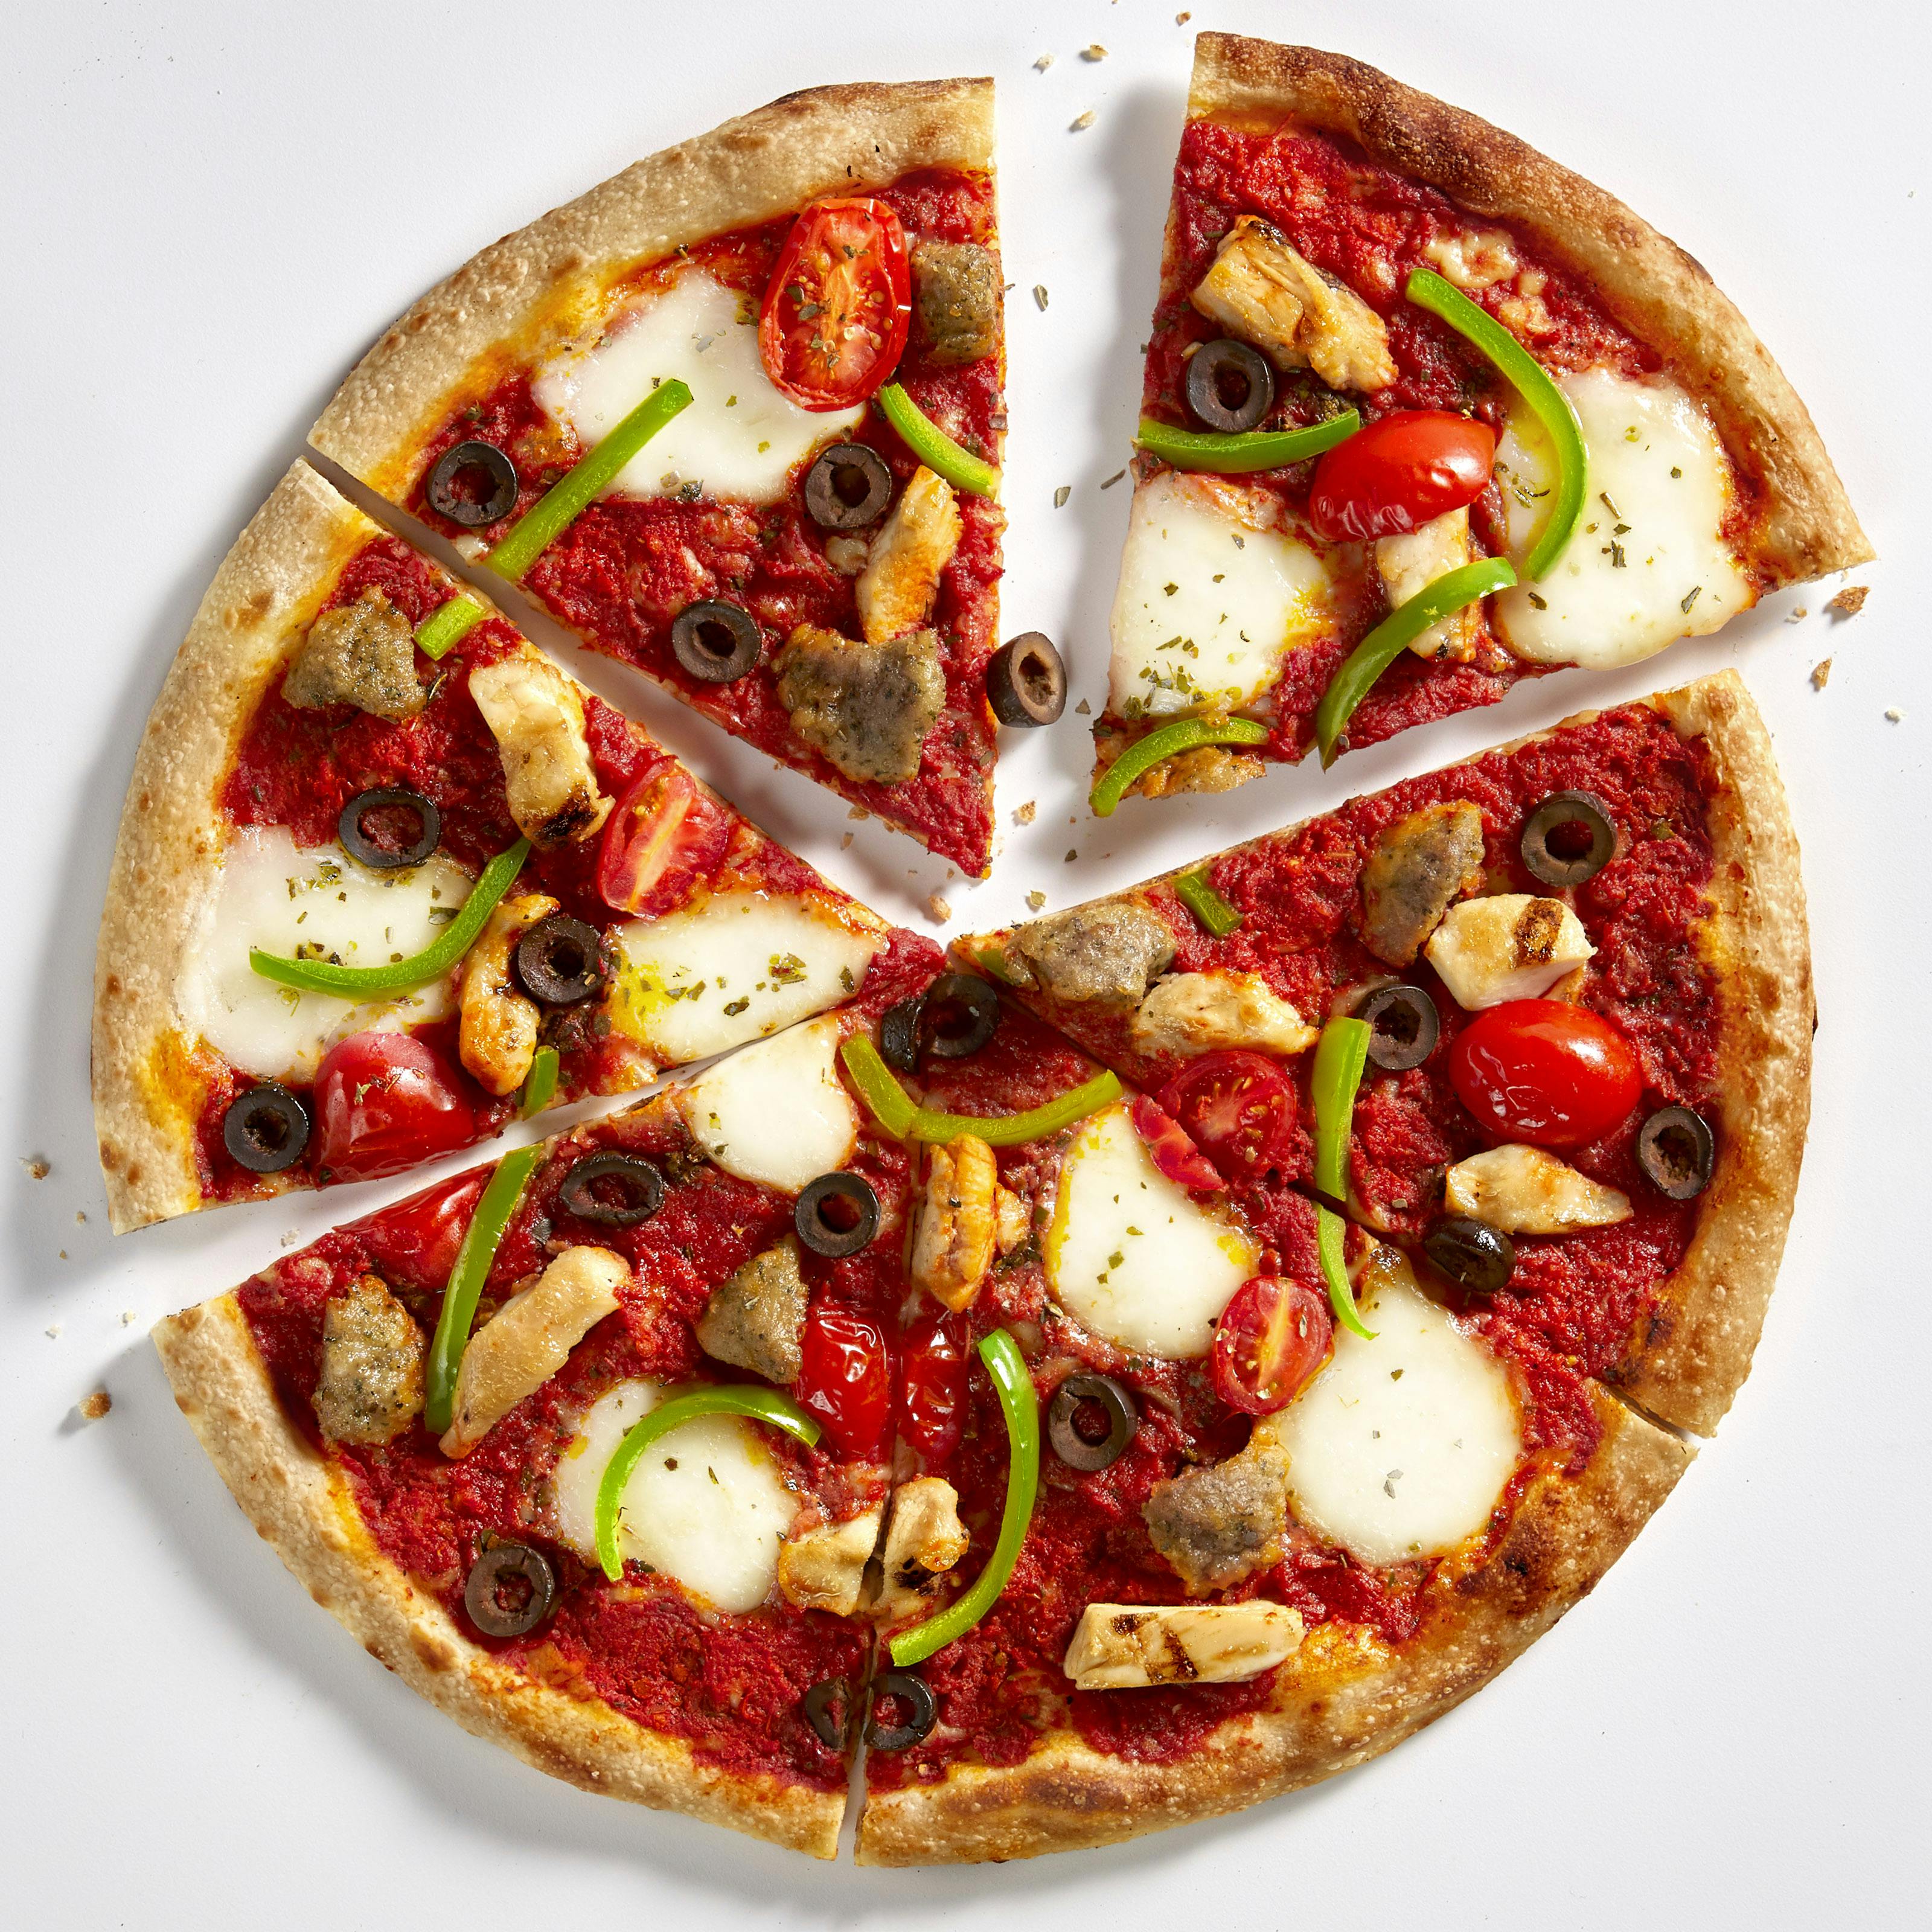 Build Your Own Pizza (11-inch) from Blaze Pizza Ames in Ames, IA